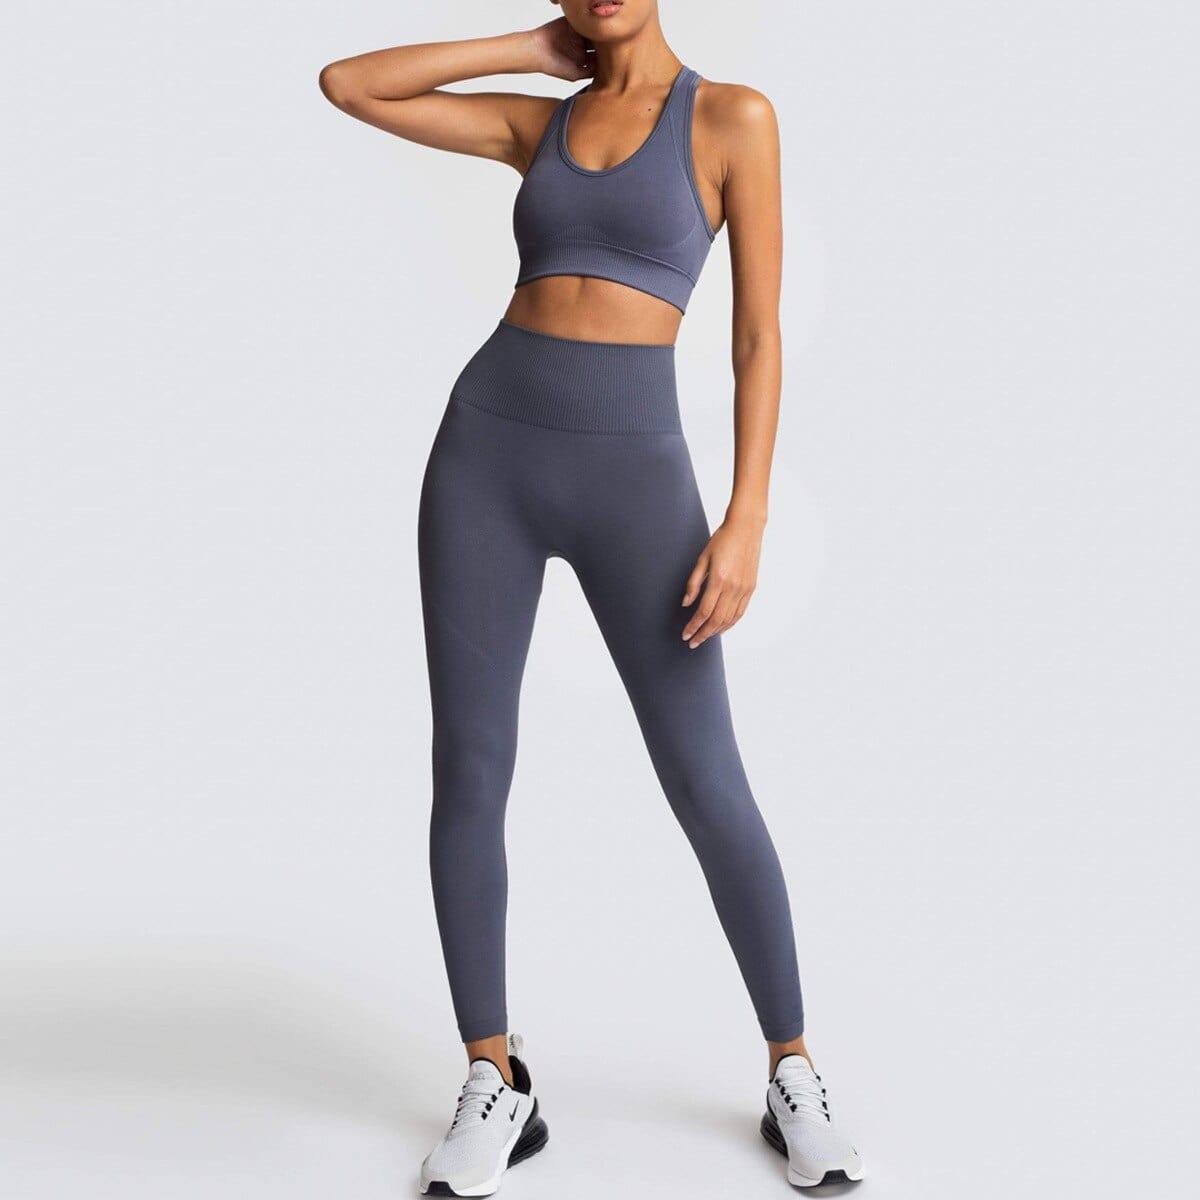 Shop 0 grey suit 2 / S Two Piece Set Women Sportswear Workout Clothes for Women Sport Sets Suits For Fitness Long Sleeve Seamless Yoga Set Leggings Mademoiselle Home Decor